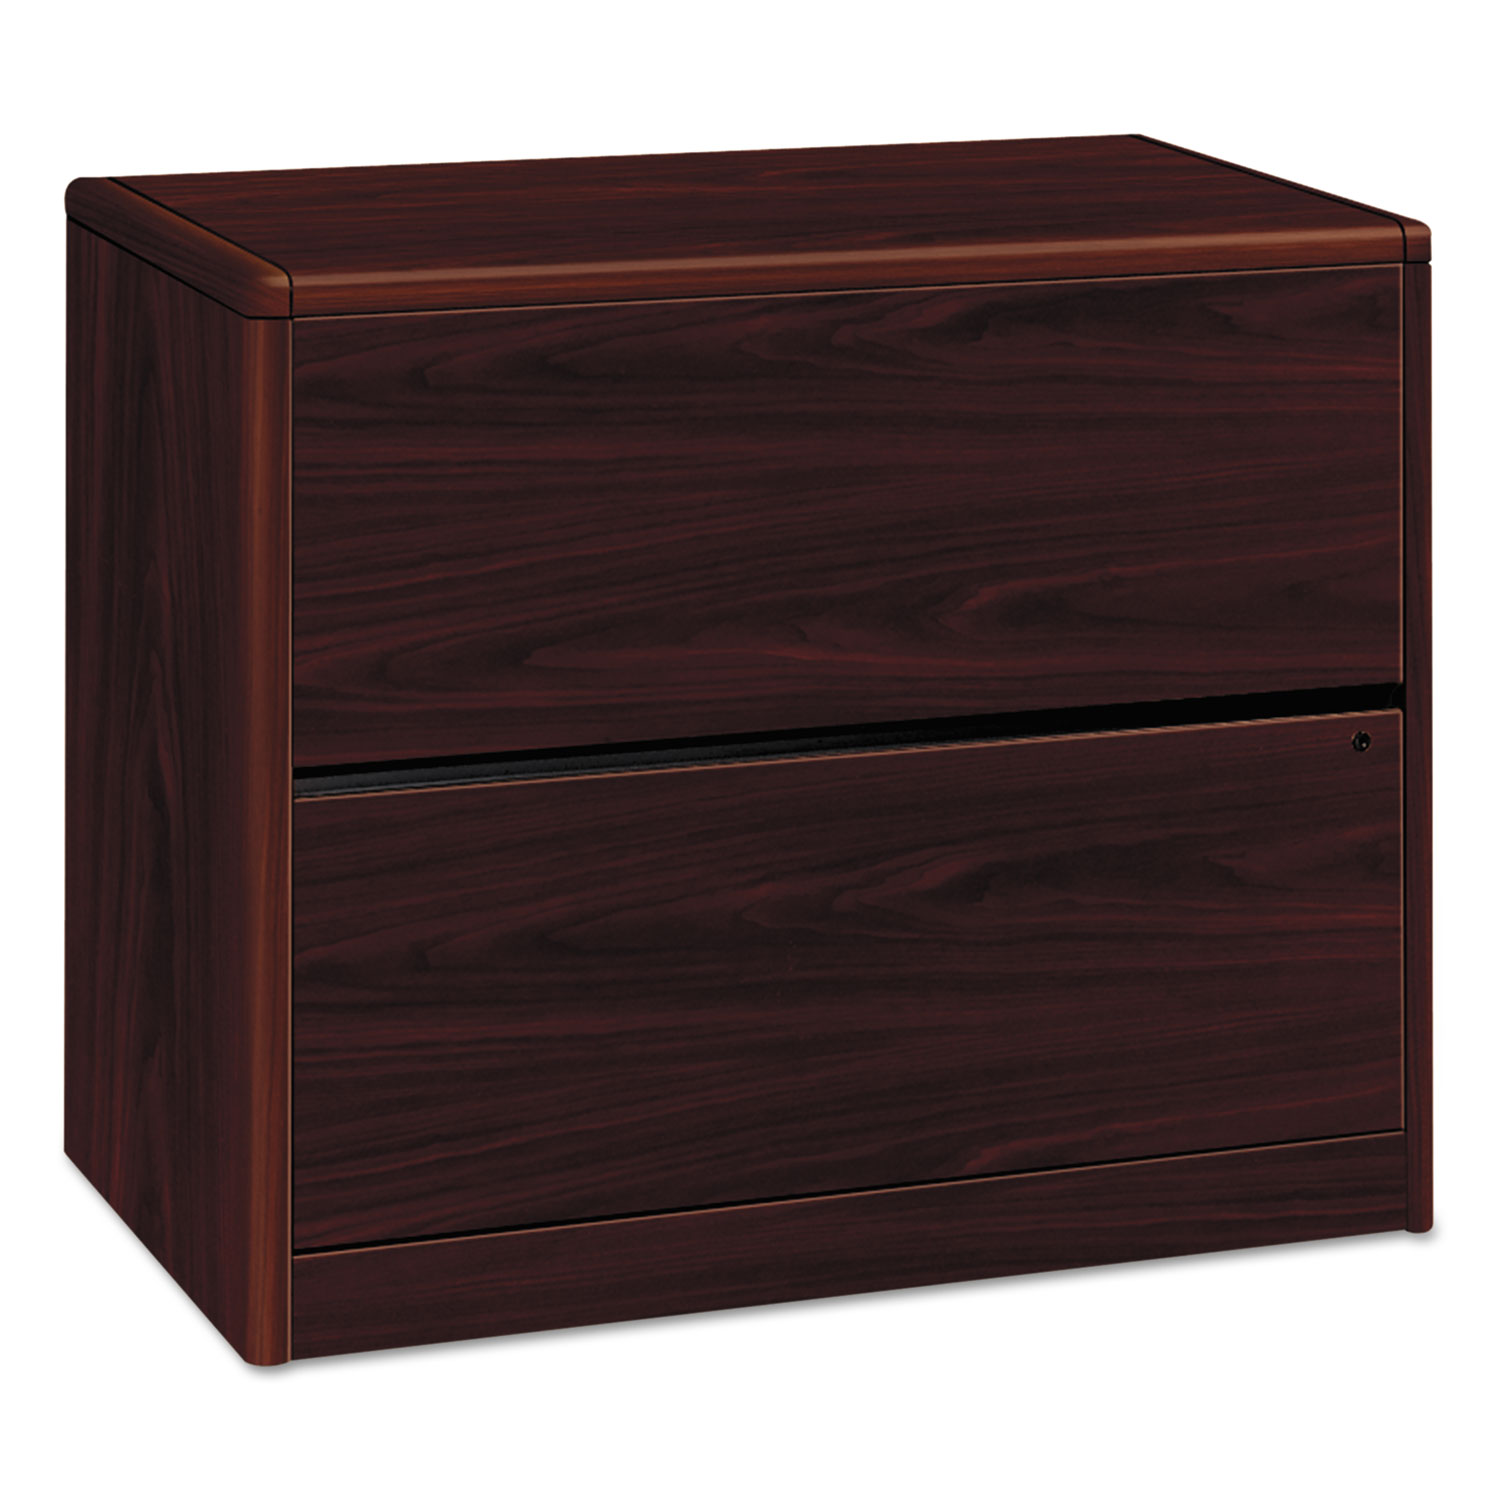 10700 Series Two Drawer Lateral File, 36w x 20d x 29 1/2h, Mahogany